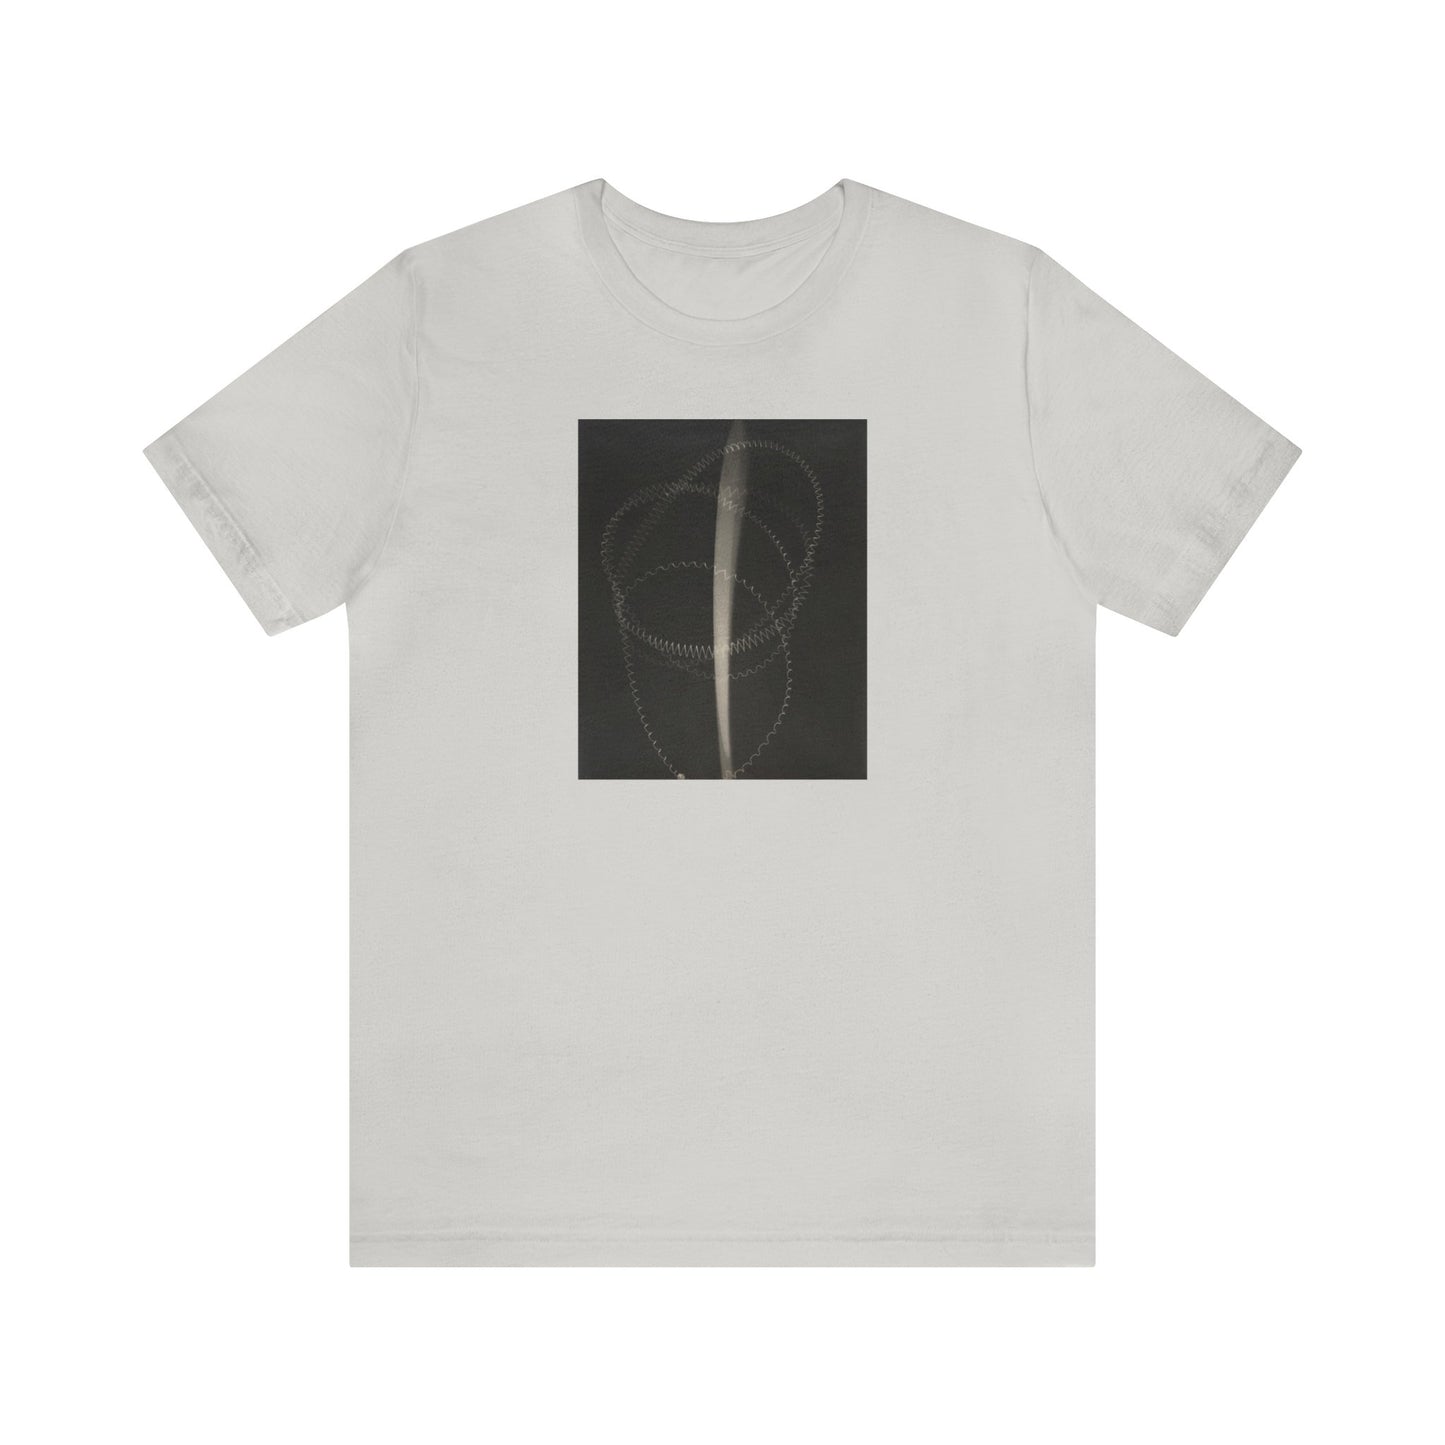 MAN RAY - THE FEATHER - UNISEX JERSEY T-SHIRT